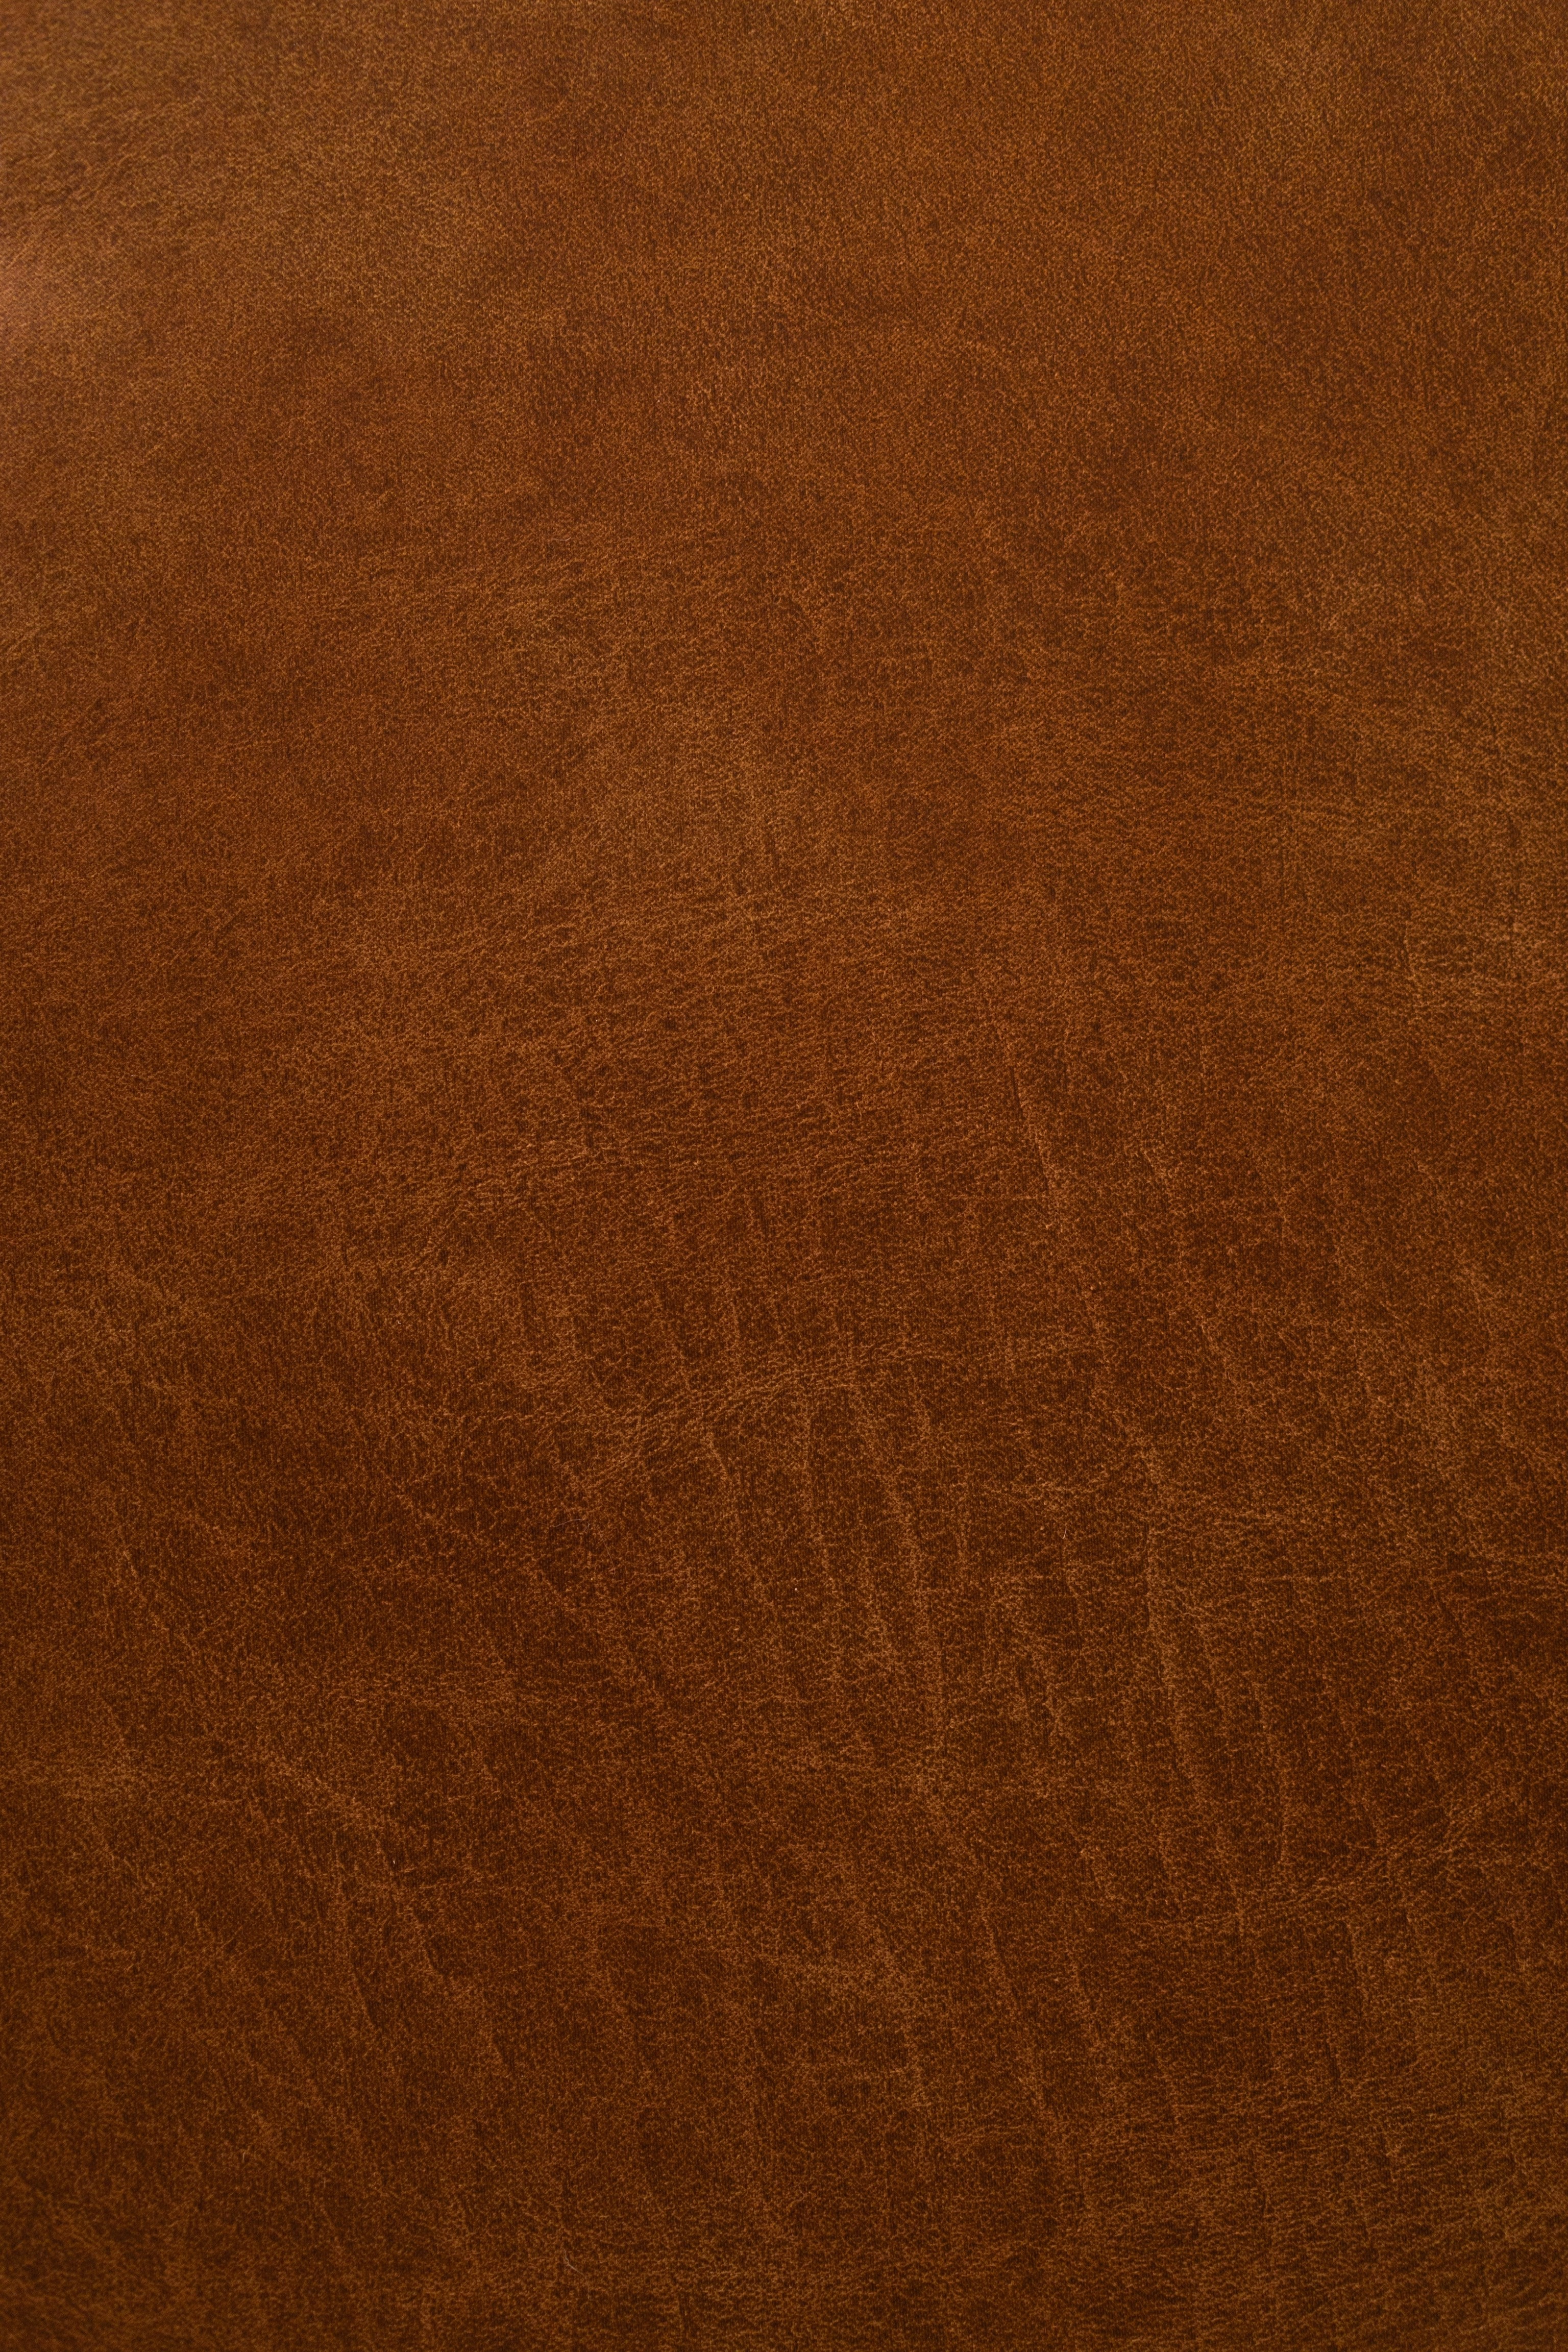 skin, surface, texture, textures, brown, leather